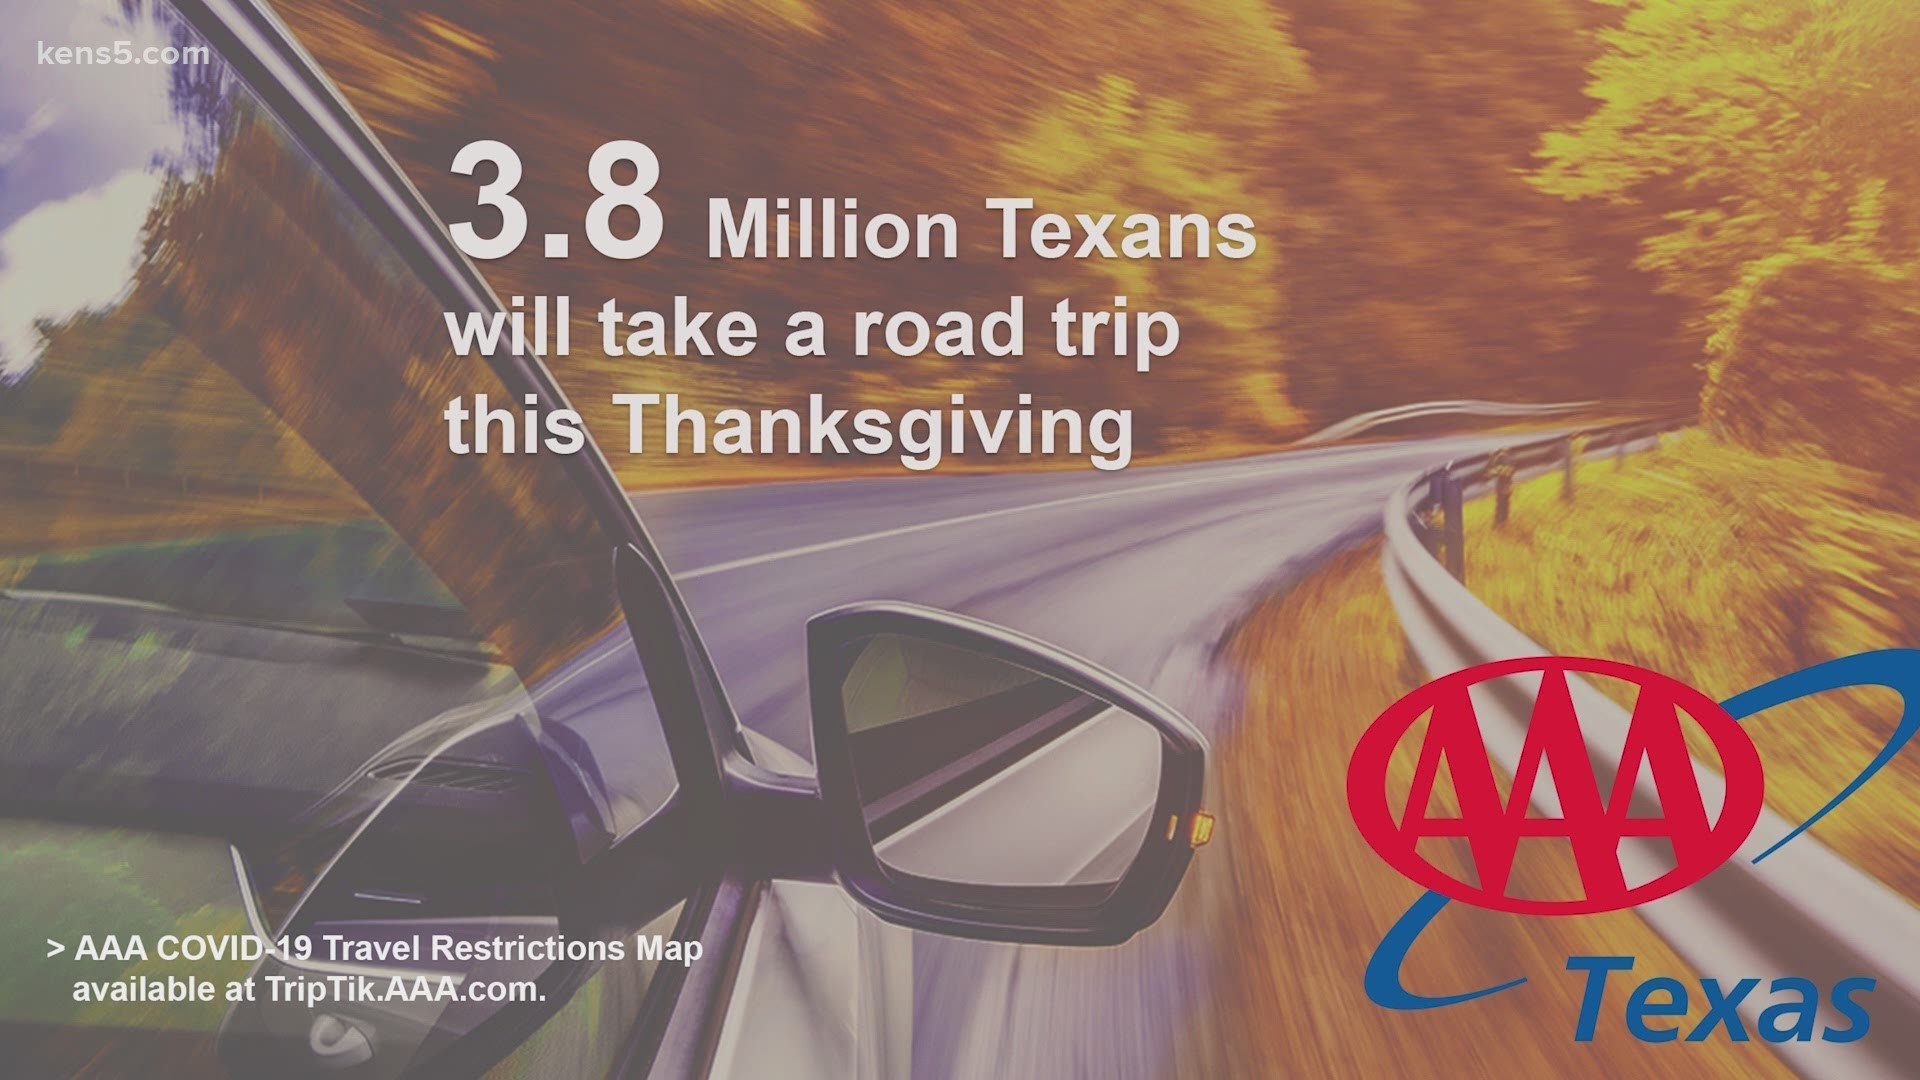 AAA Texas said 3.8 millions Texans are expected to hit the road during the Thanksgiving holiday. So when should you leave, and how should you prepare?